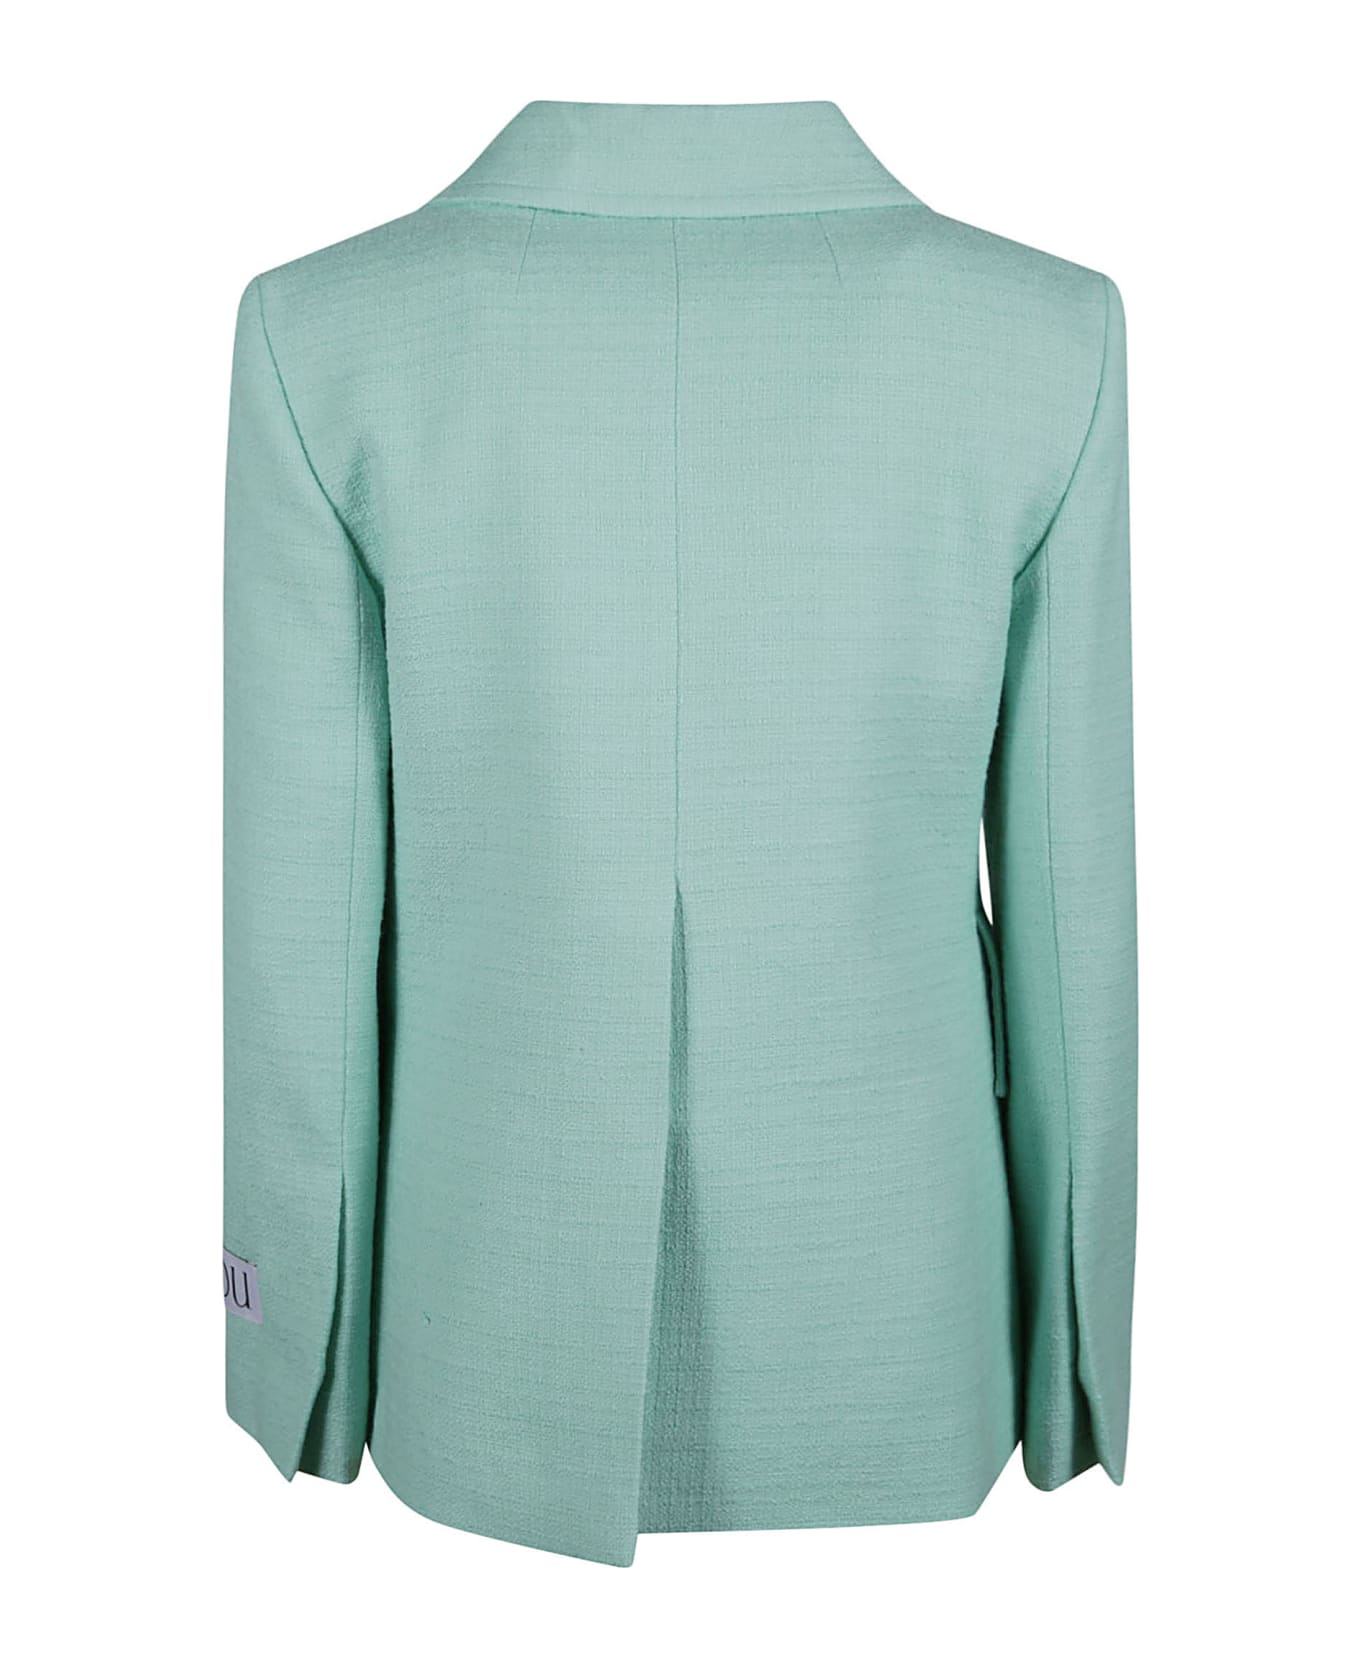 Patou Fitted Two Buttoned Blazer - Green